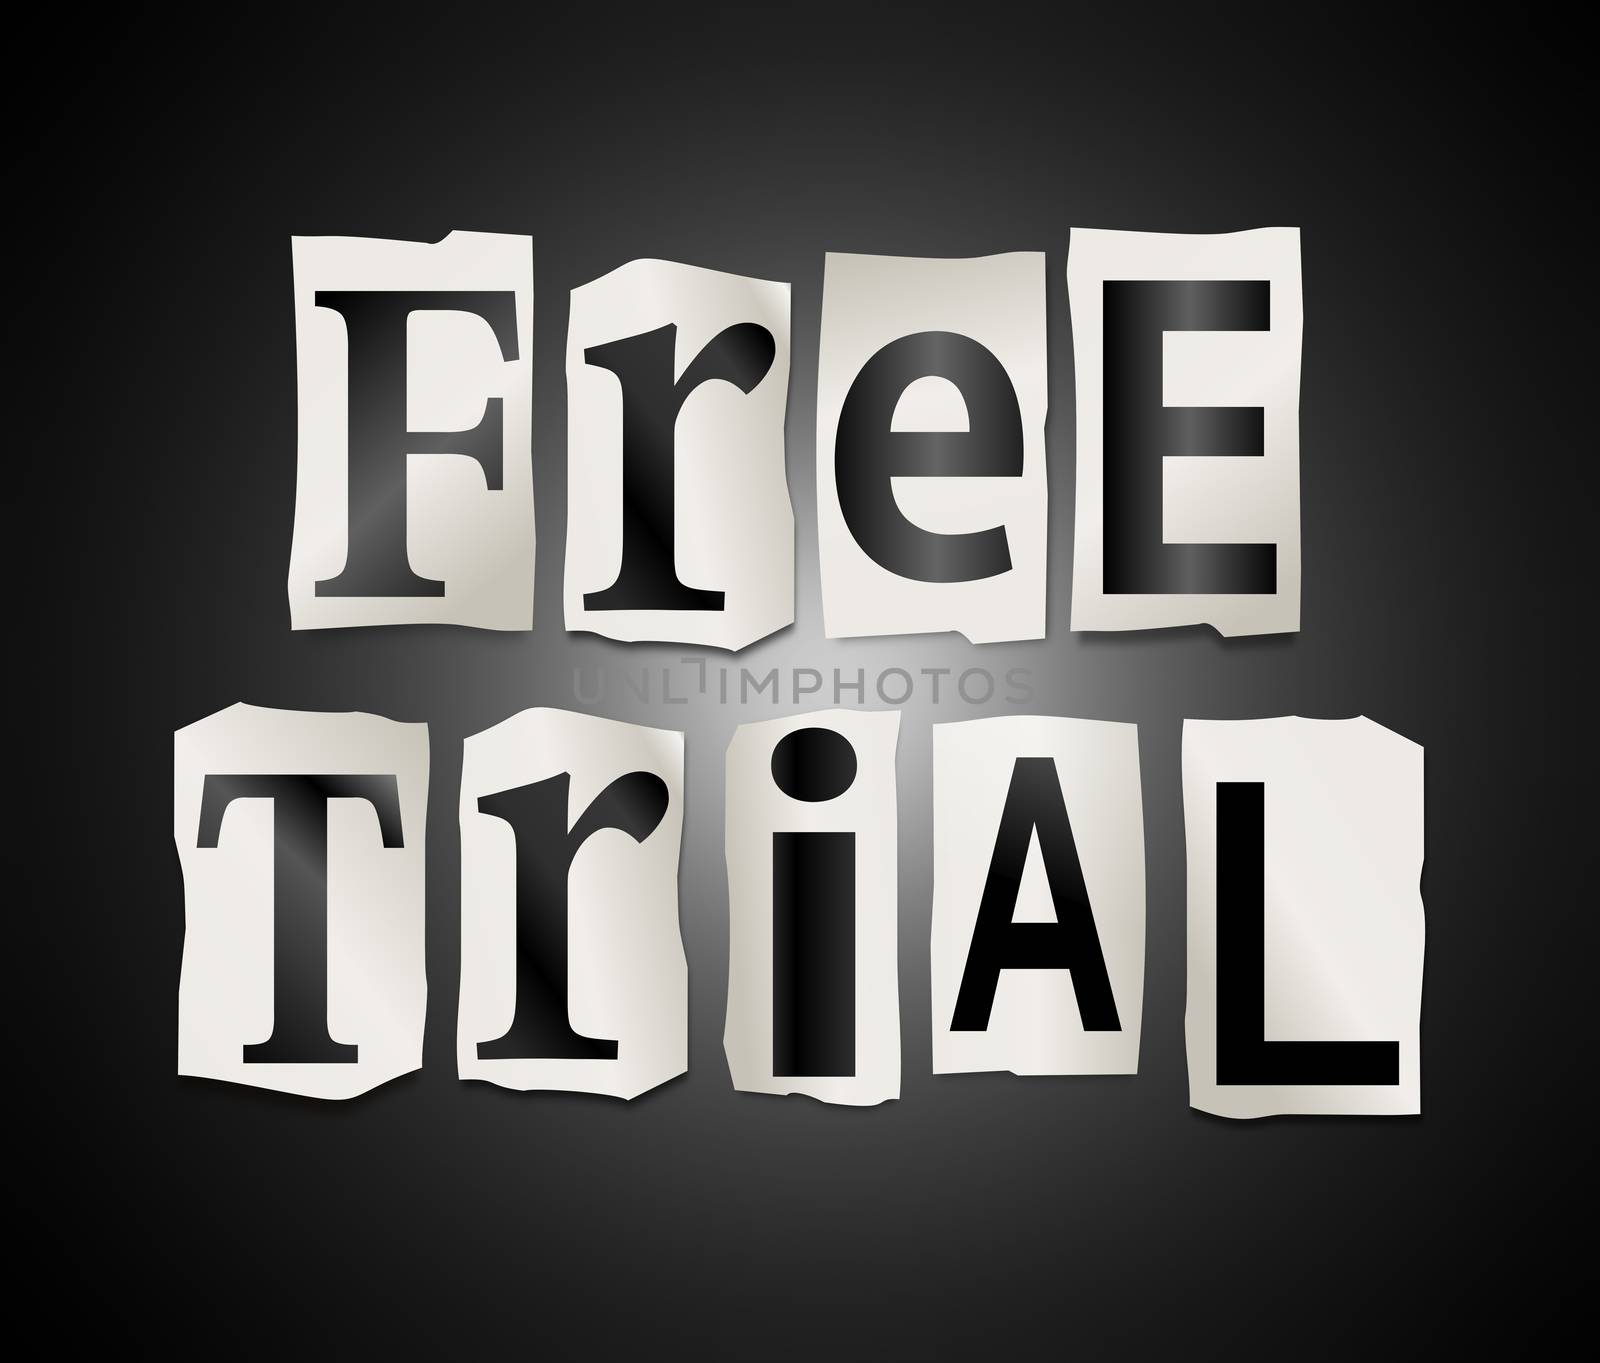 Illustration depicting a set of cut out printed letters arranged to form the words free trial.